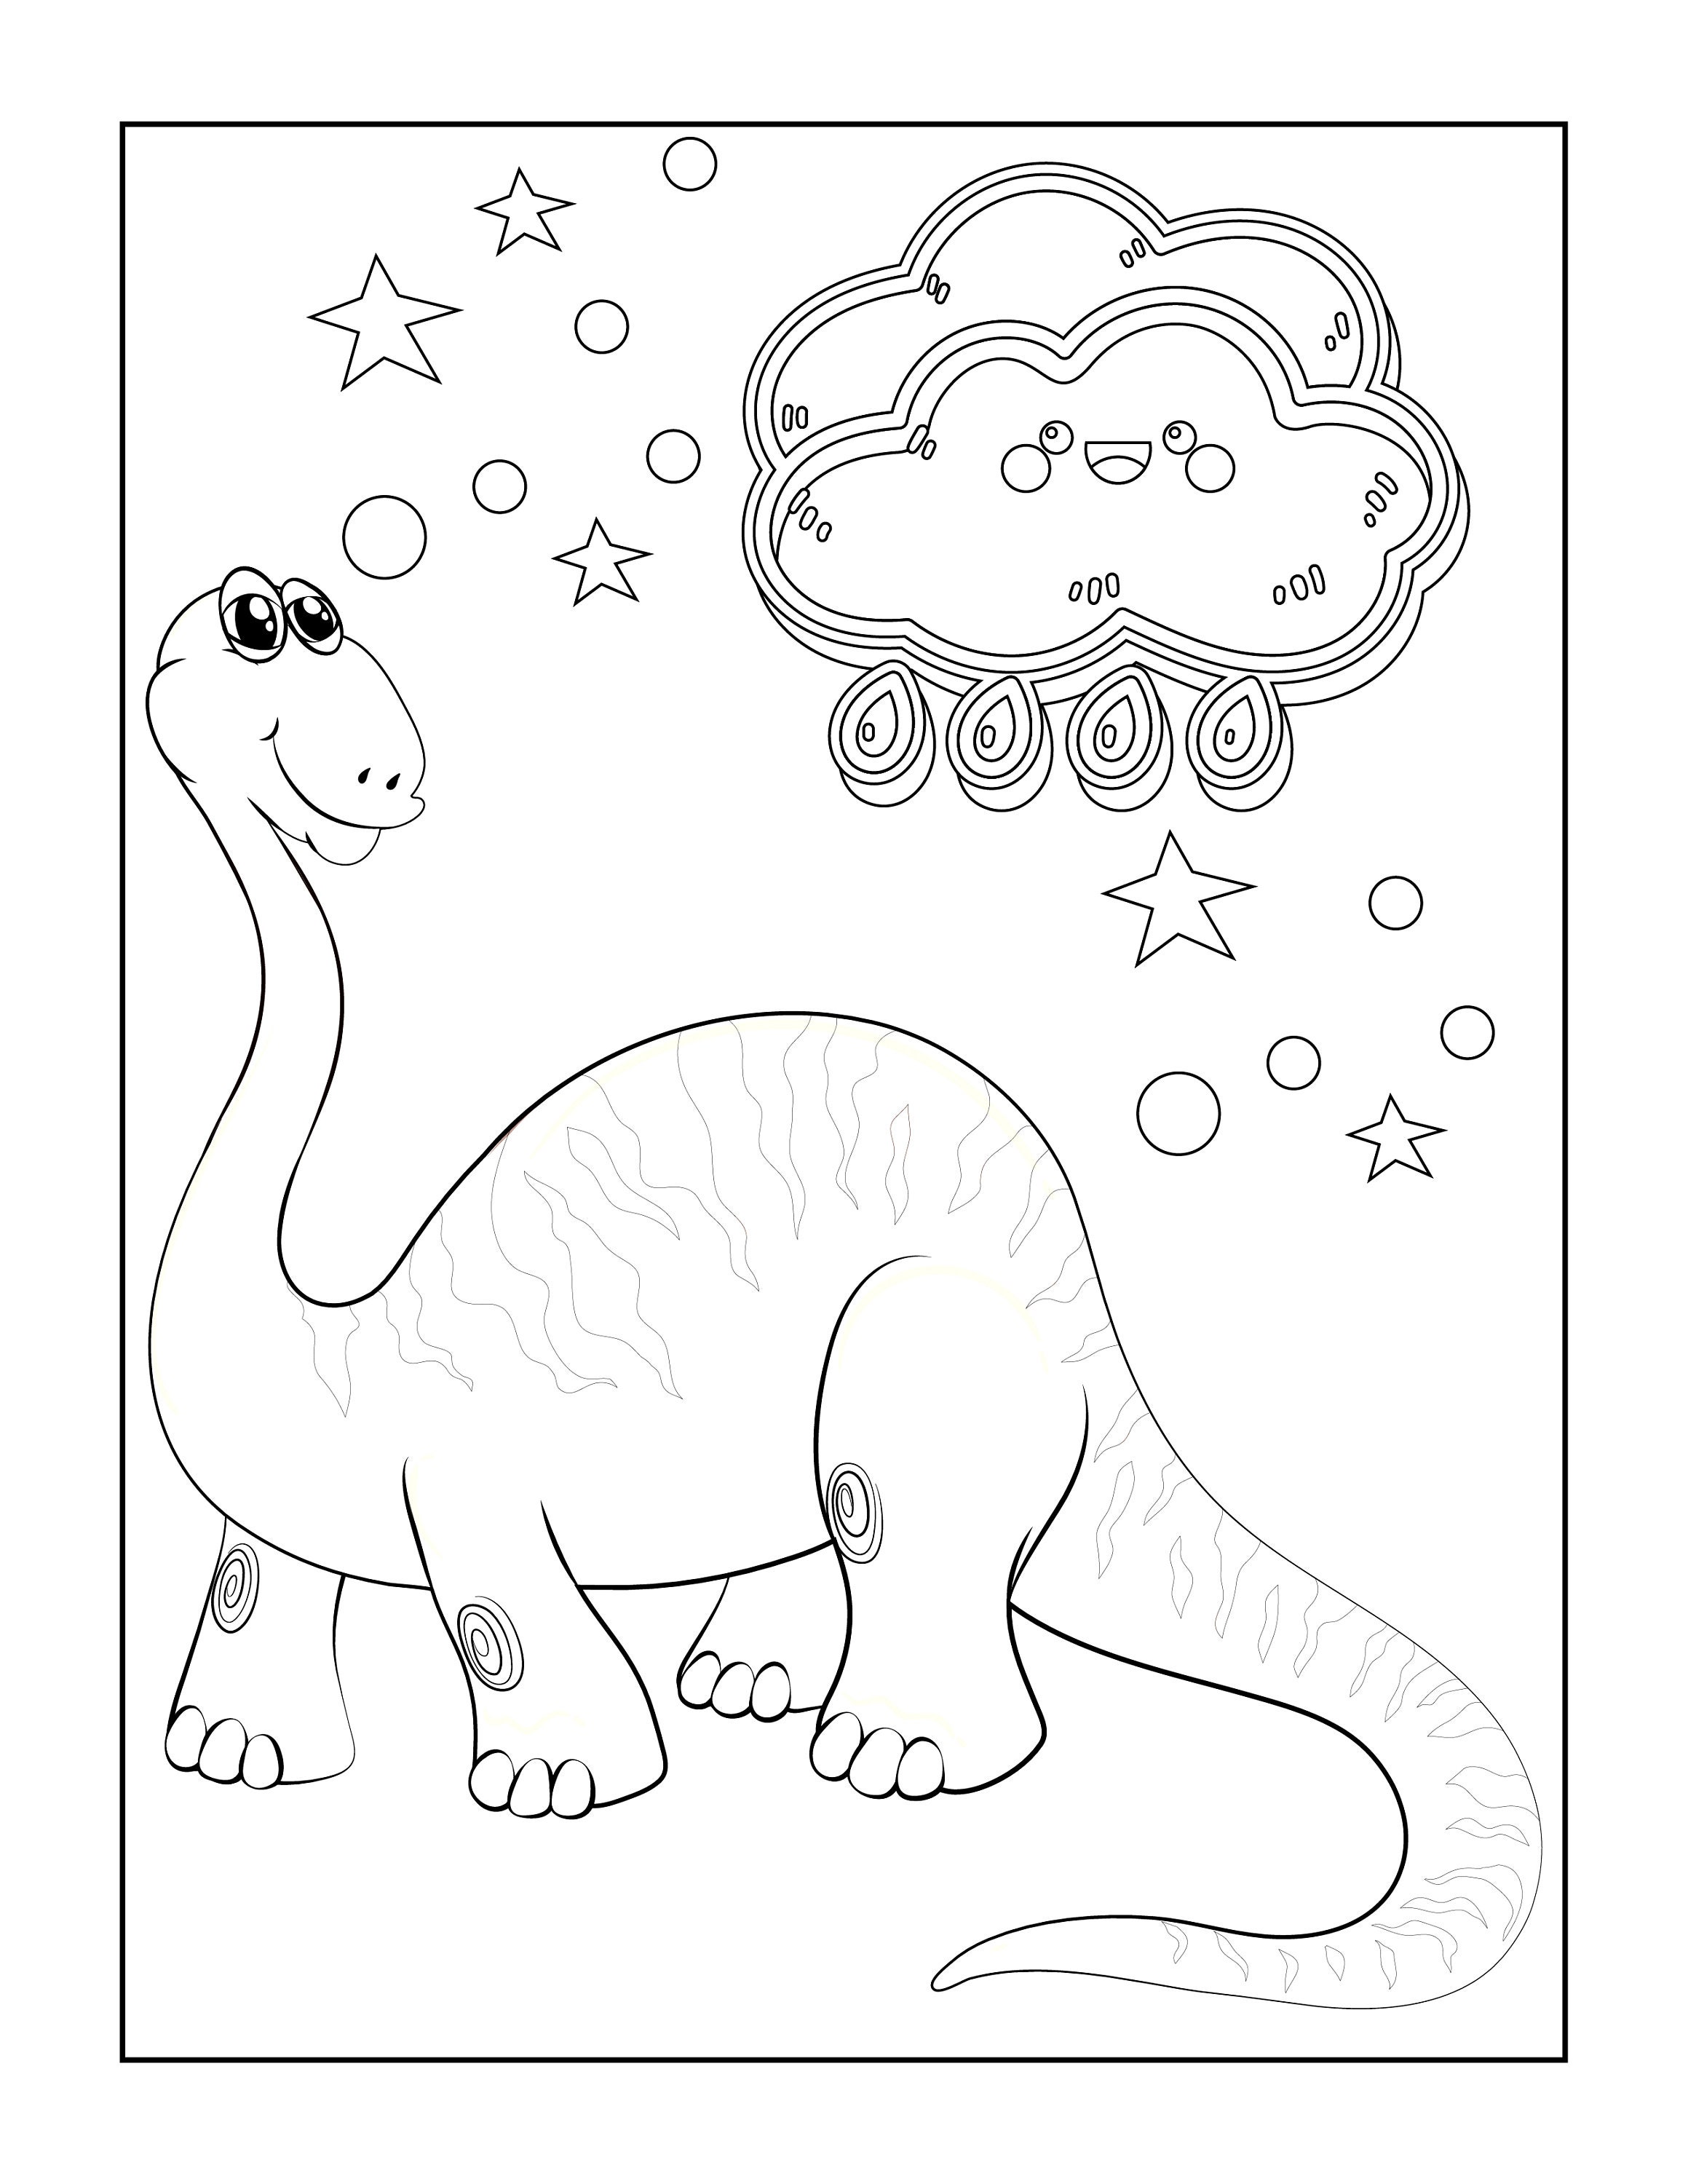 Dino Sketchbook for Kids ages 4-8 Blank Paper for Drawing.